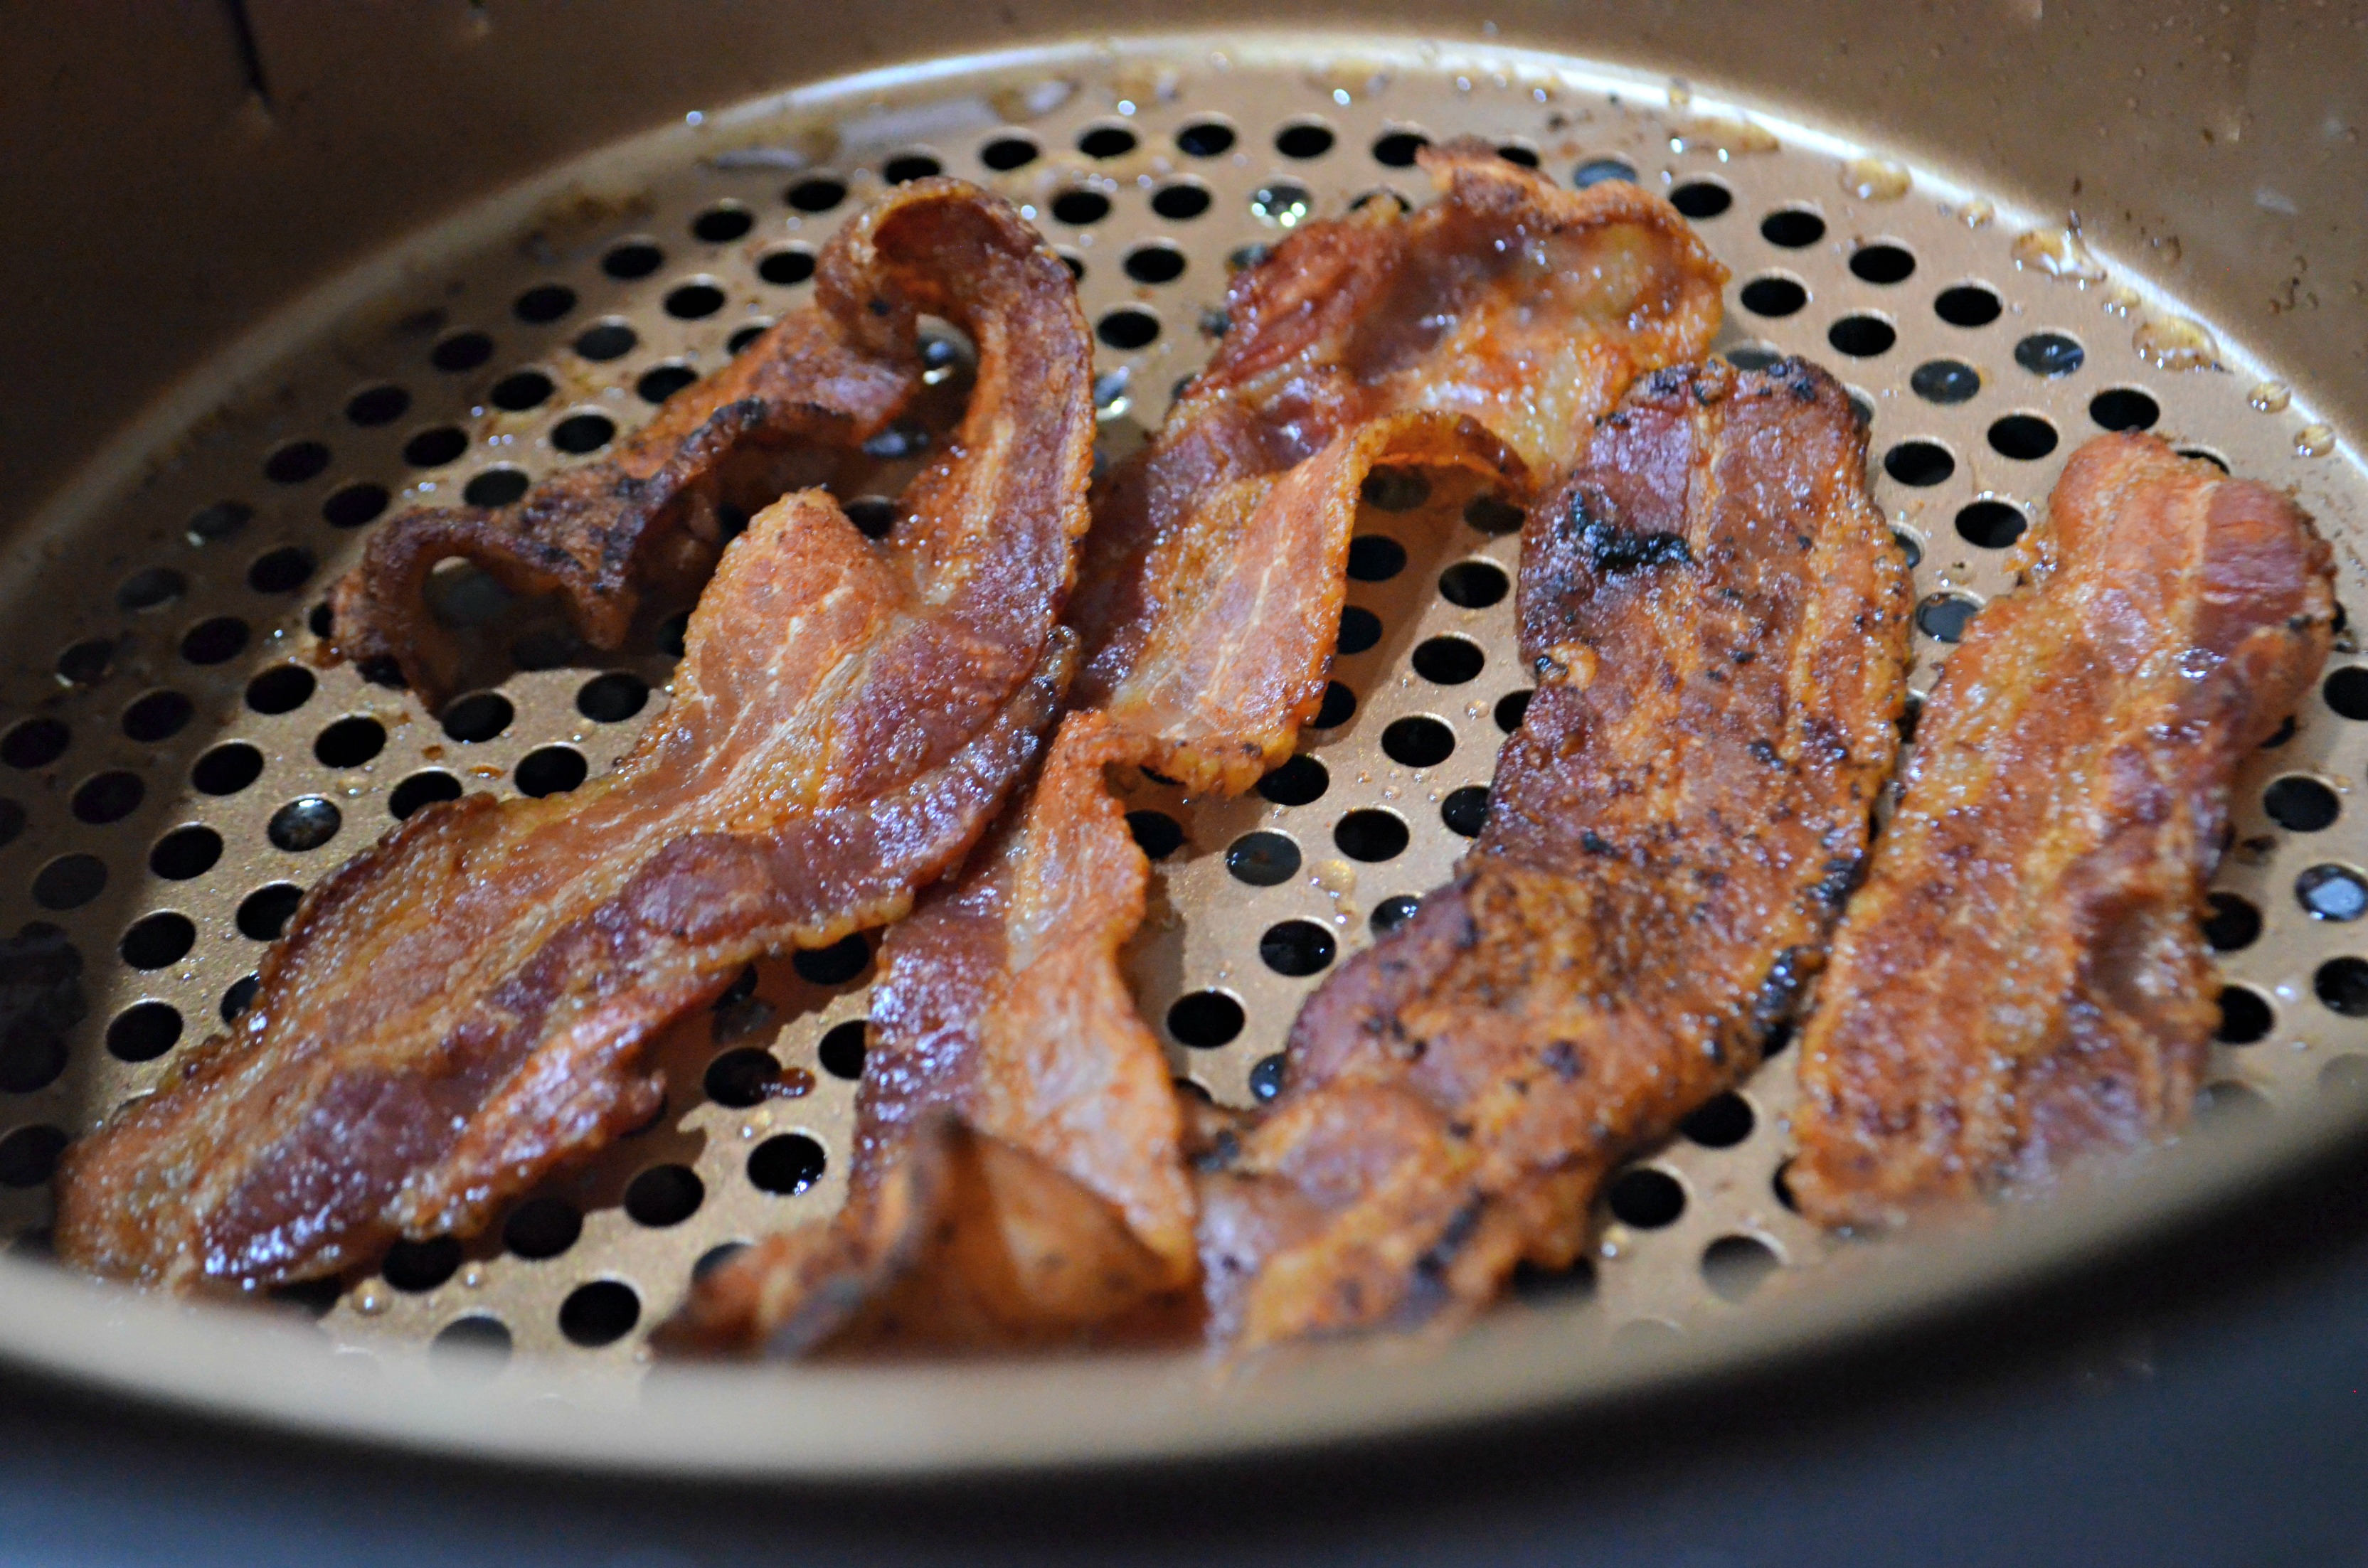 The result? Crispy, delicious bacon without the mess.